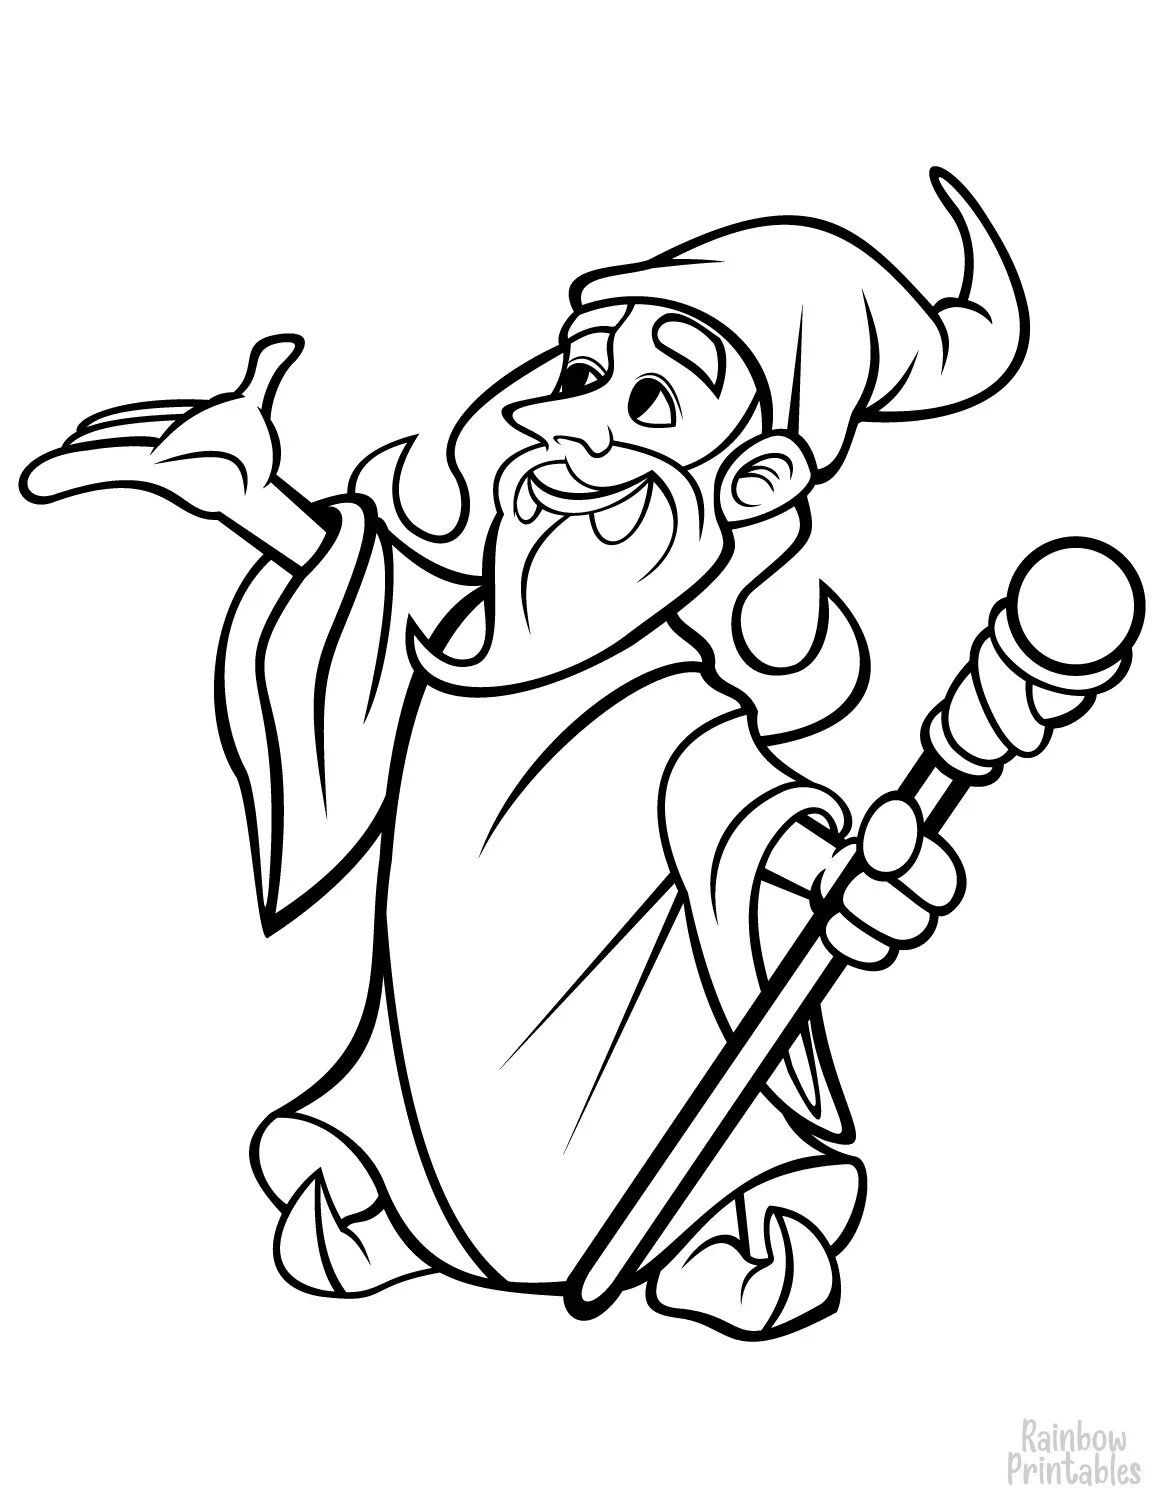 WIZARD WITH STAFF Halloween Line Art Drawing Set Free Activity Coloring Pages for Kids-02